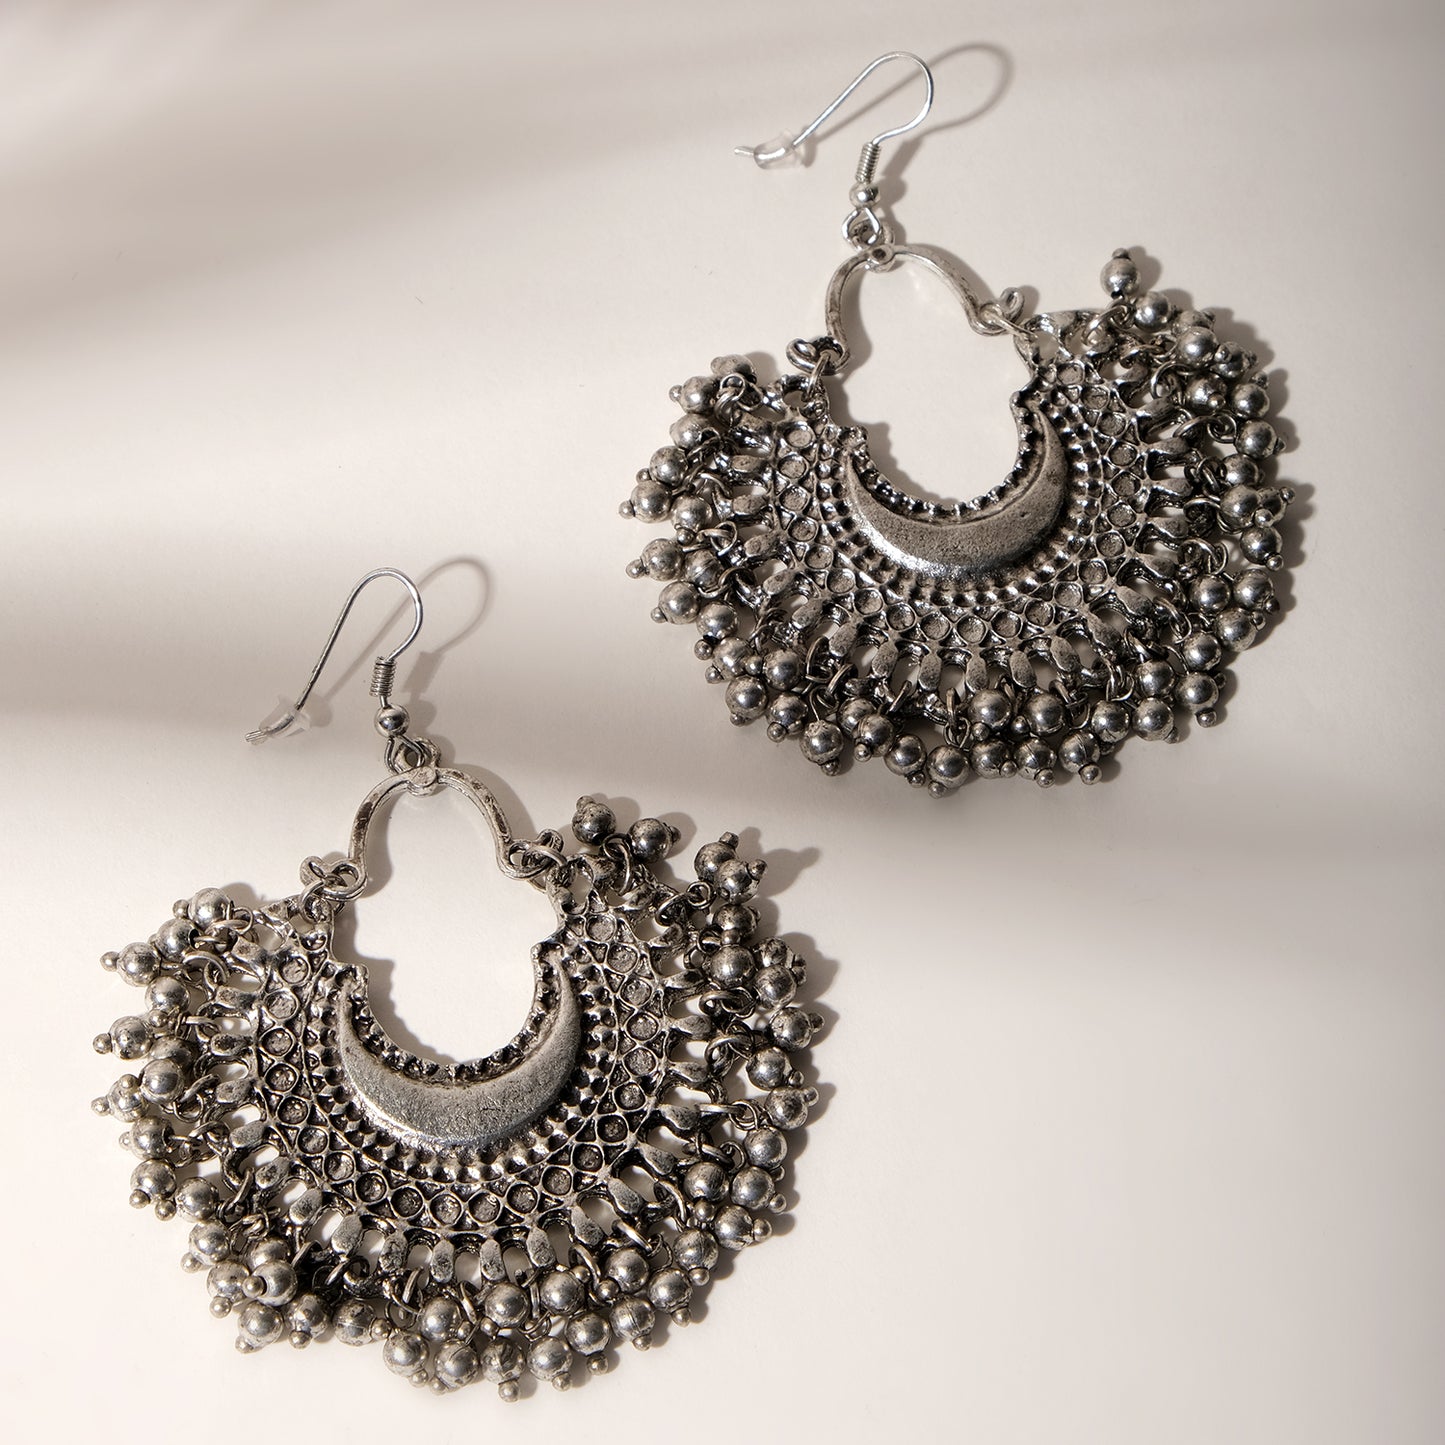 Antique Silver Carved Beads Hook Earrings